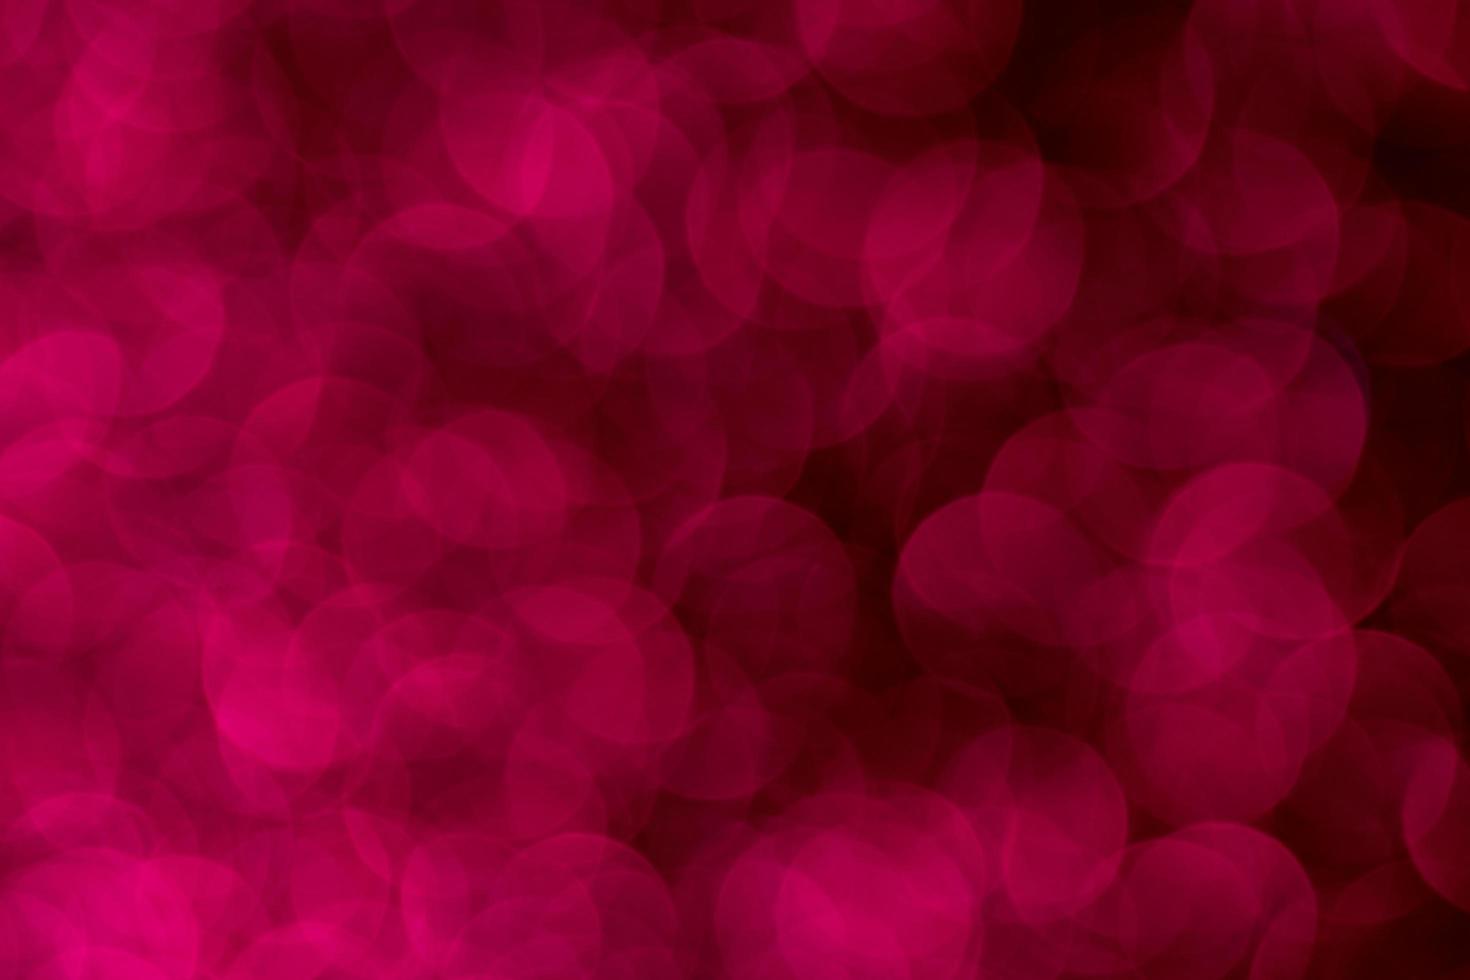 Blurred shiny black and red background photo